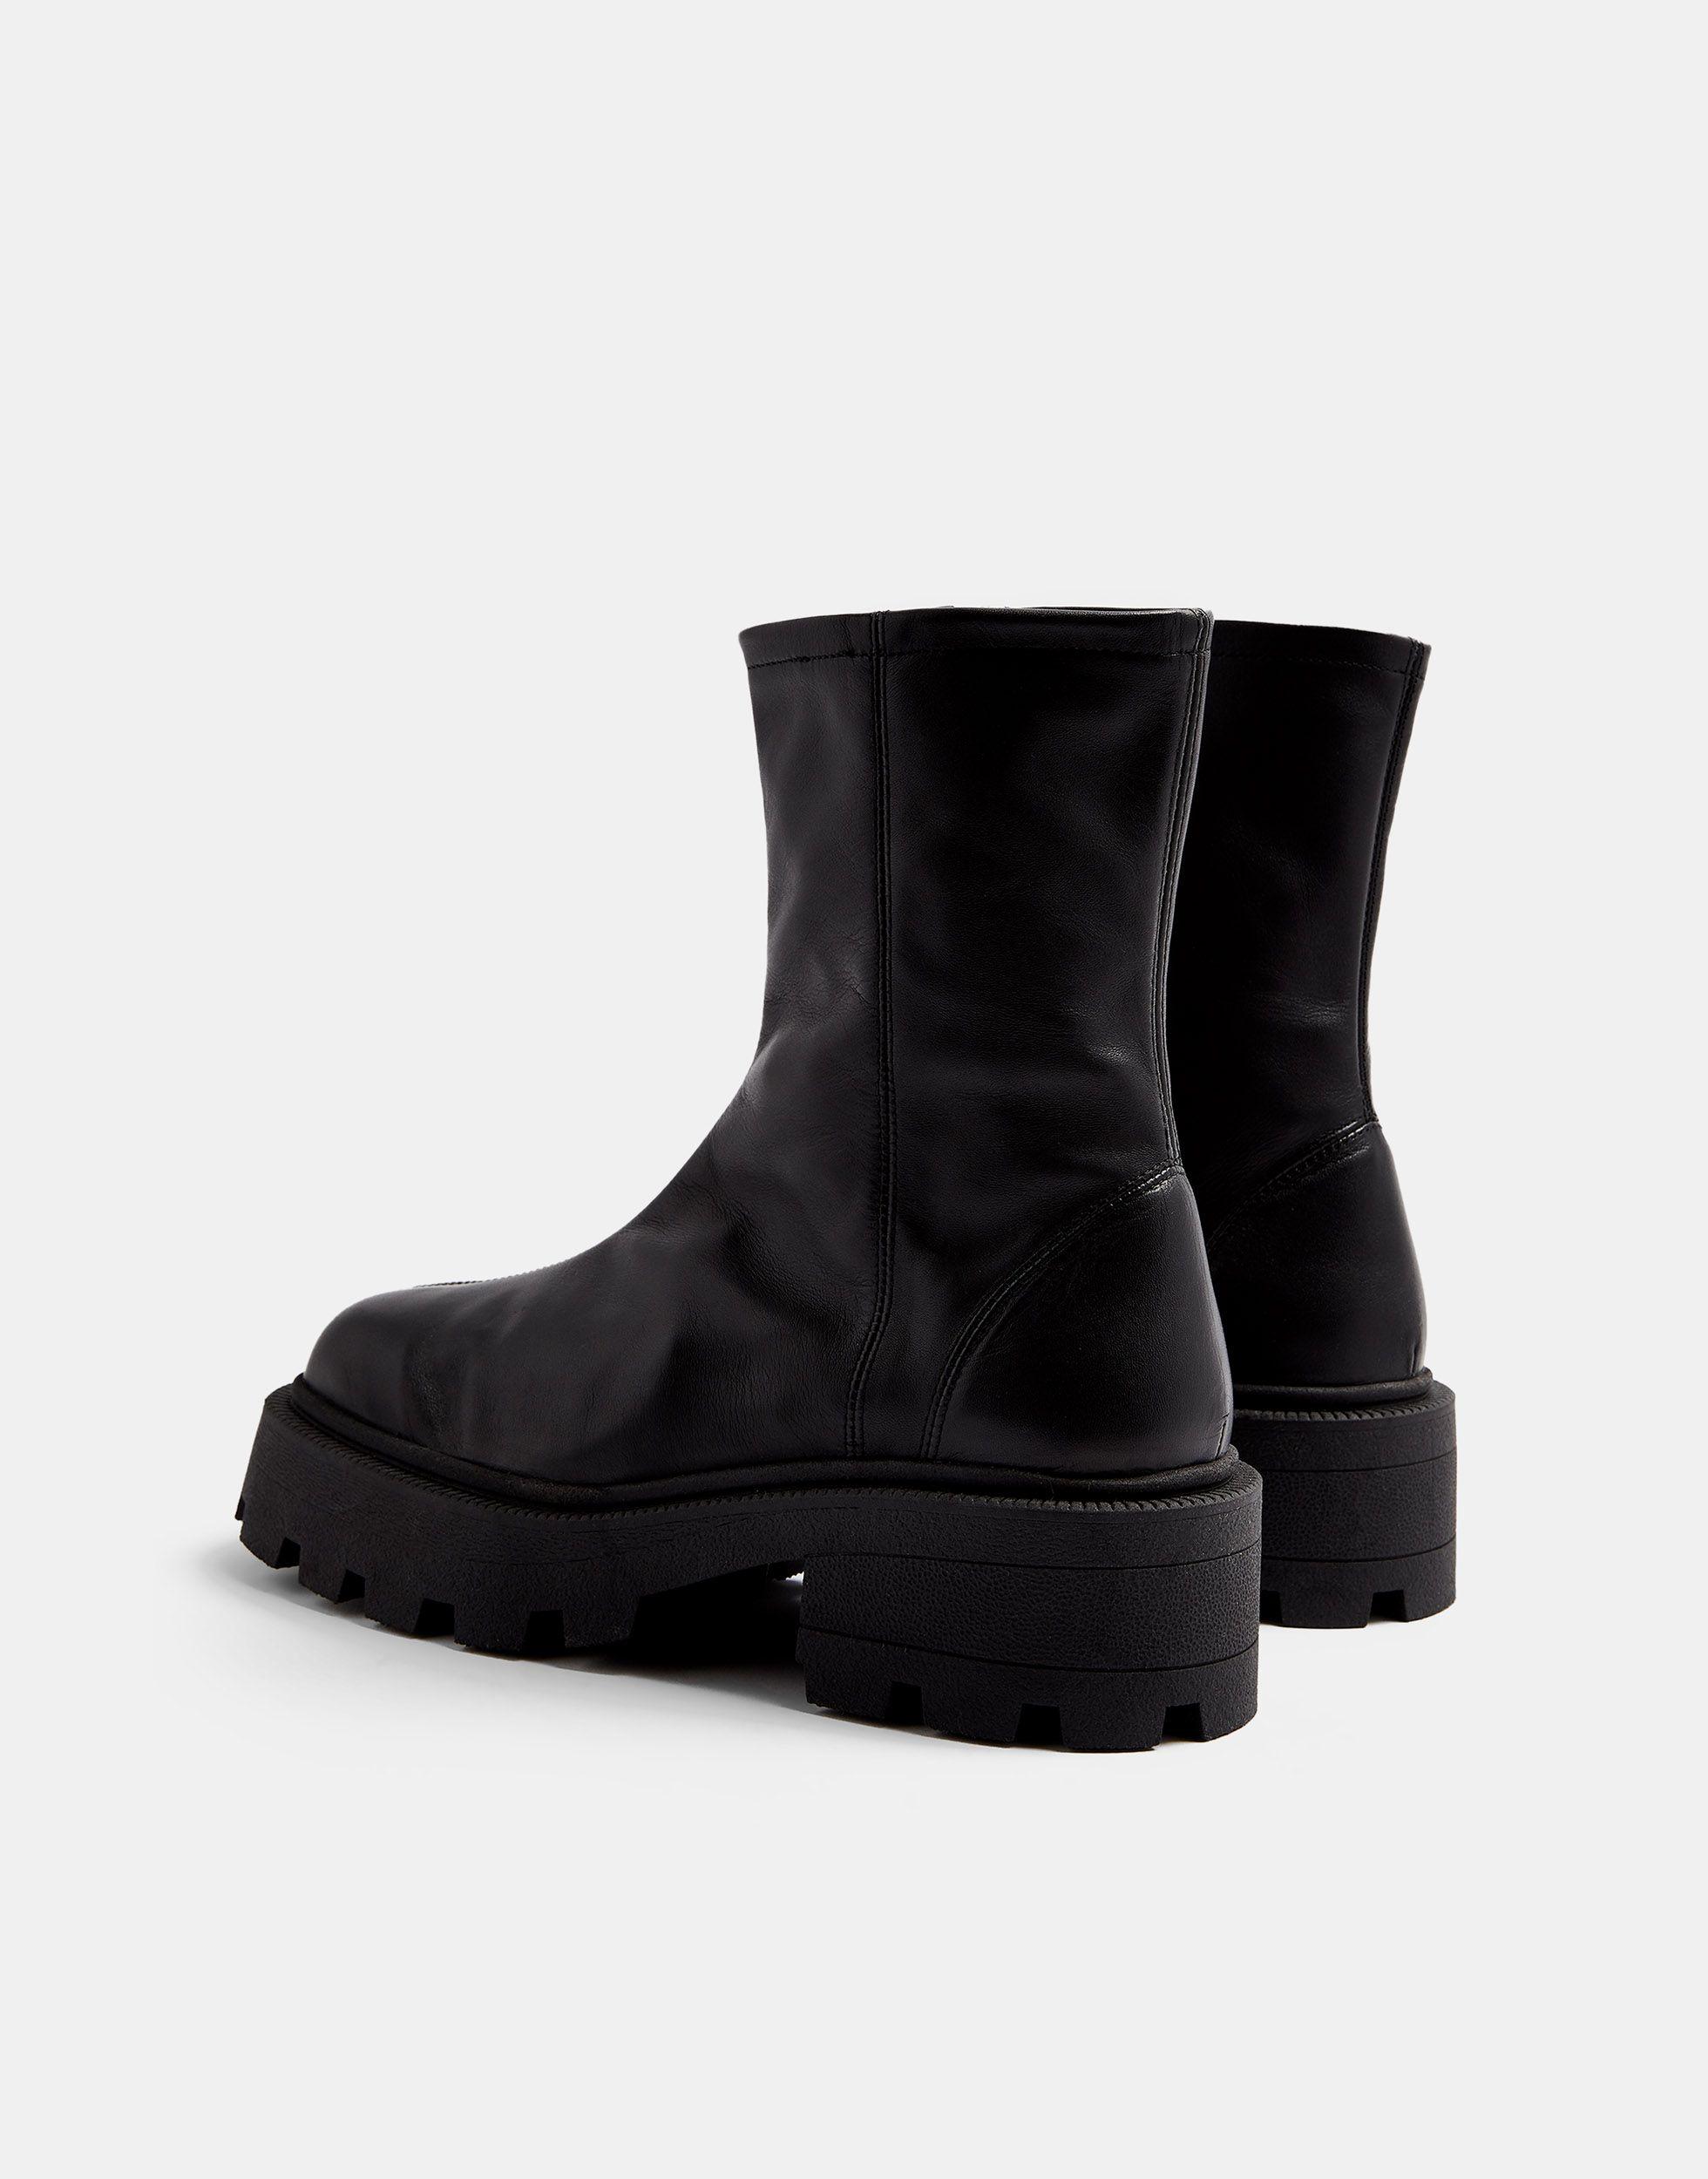 TOPSHOP Leather Alix Sock Boot in Black - Lyst